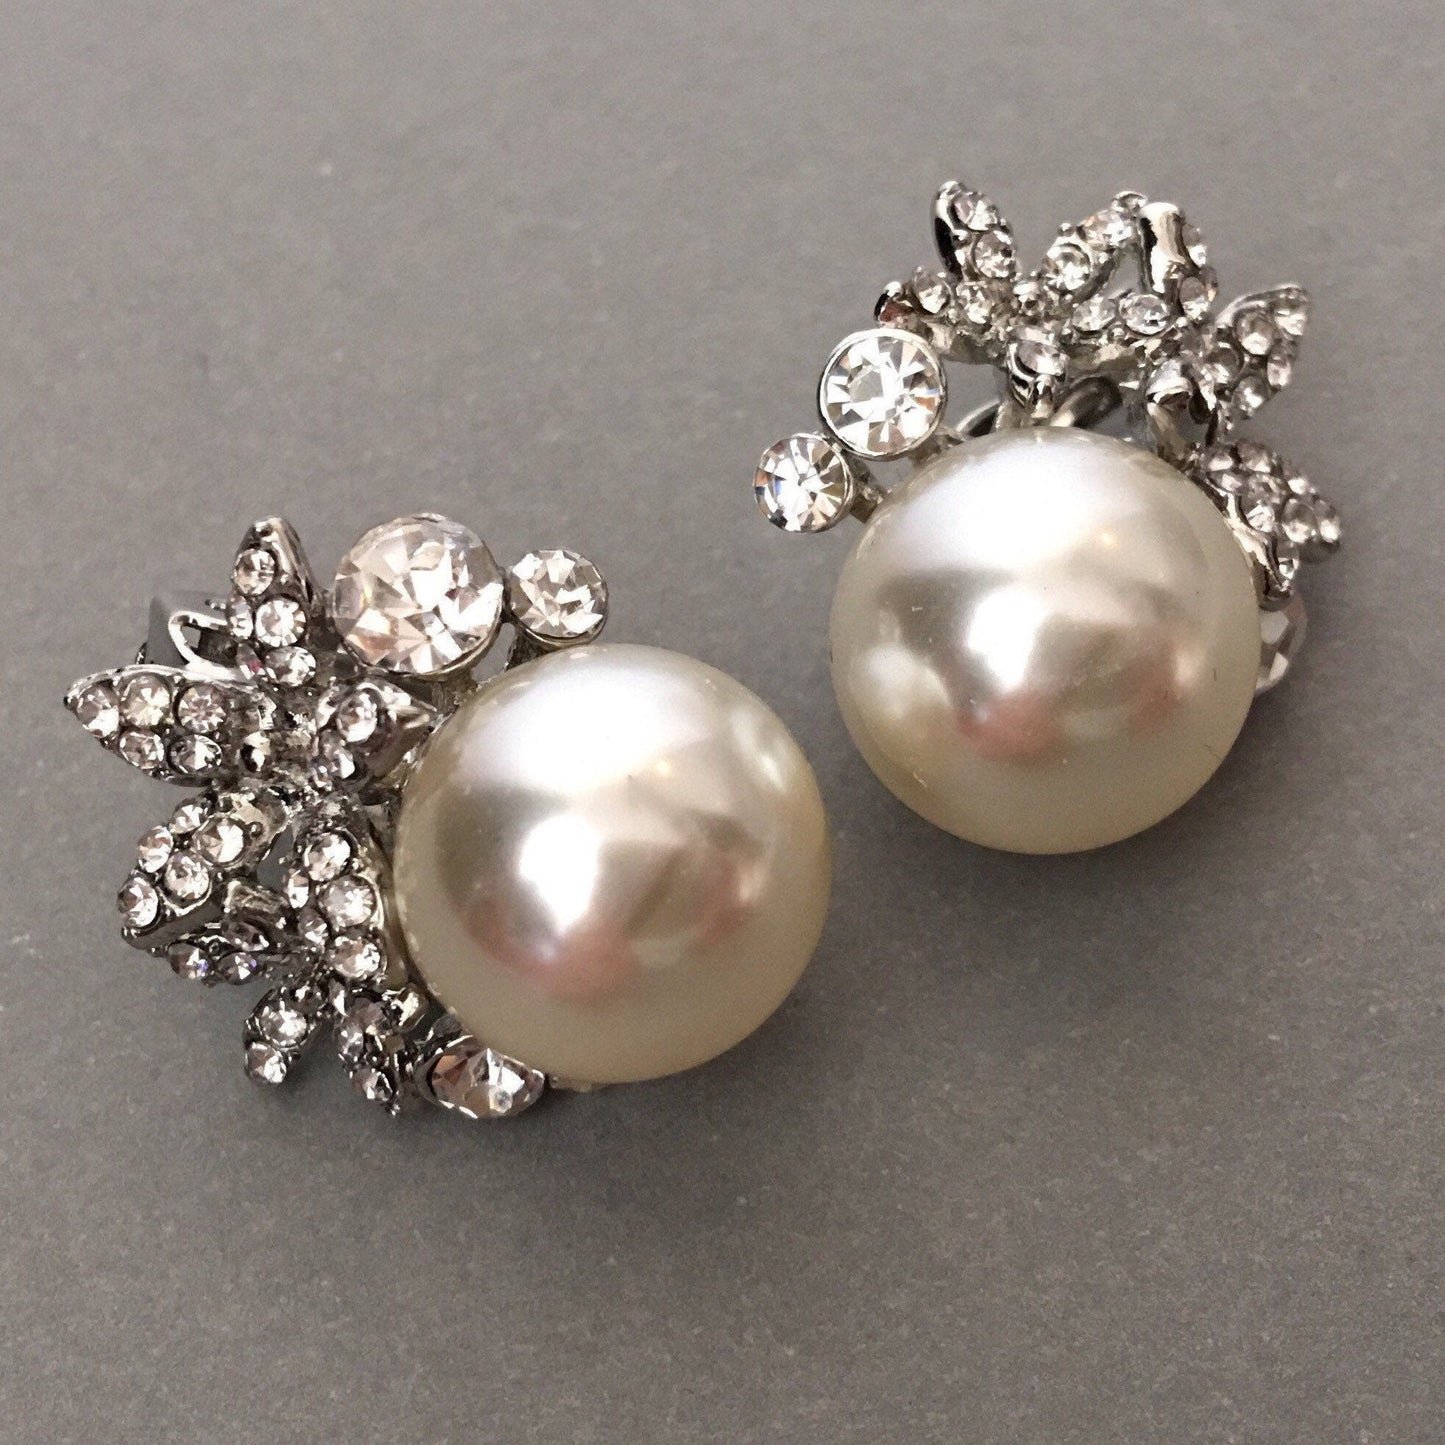 Pearl Clip on Earrings Bridal Earrings with Rhinestone and clipon back in silver with White Pearls classic design wedding earrings clip ons